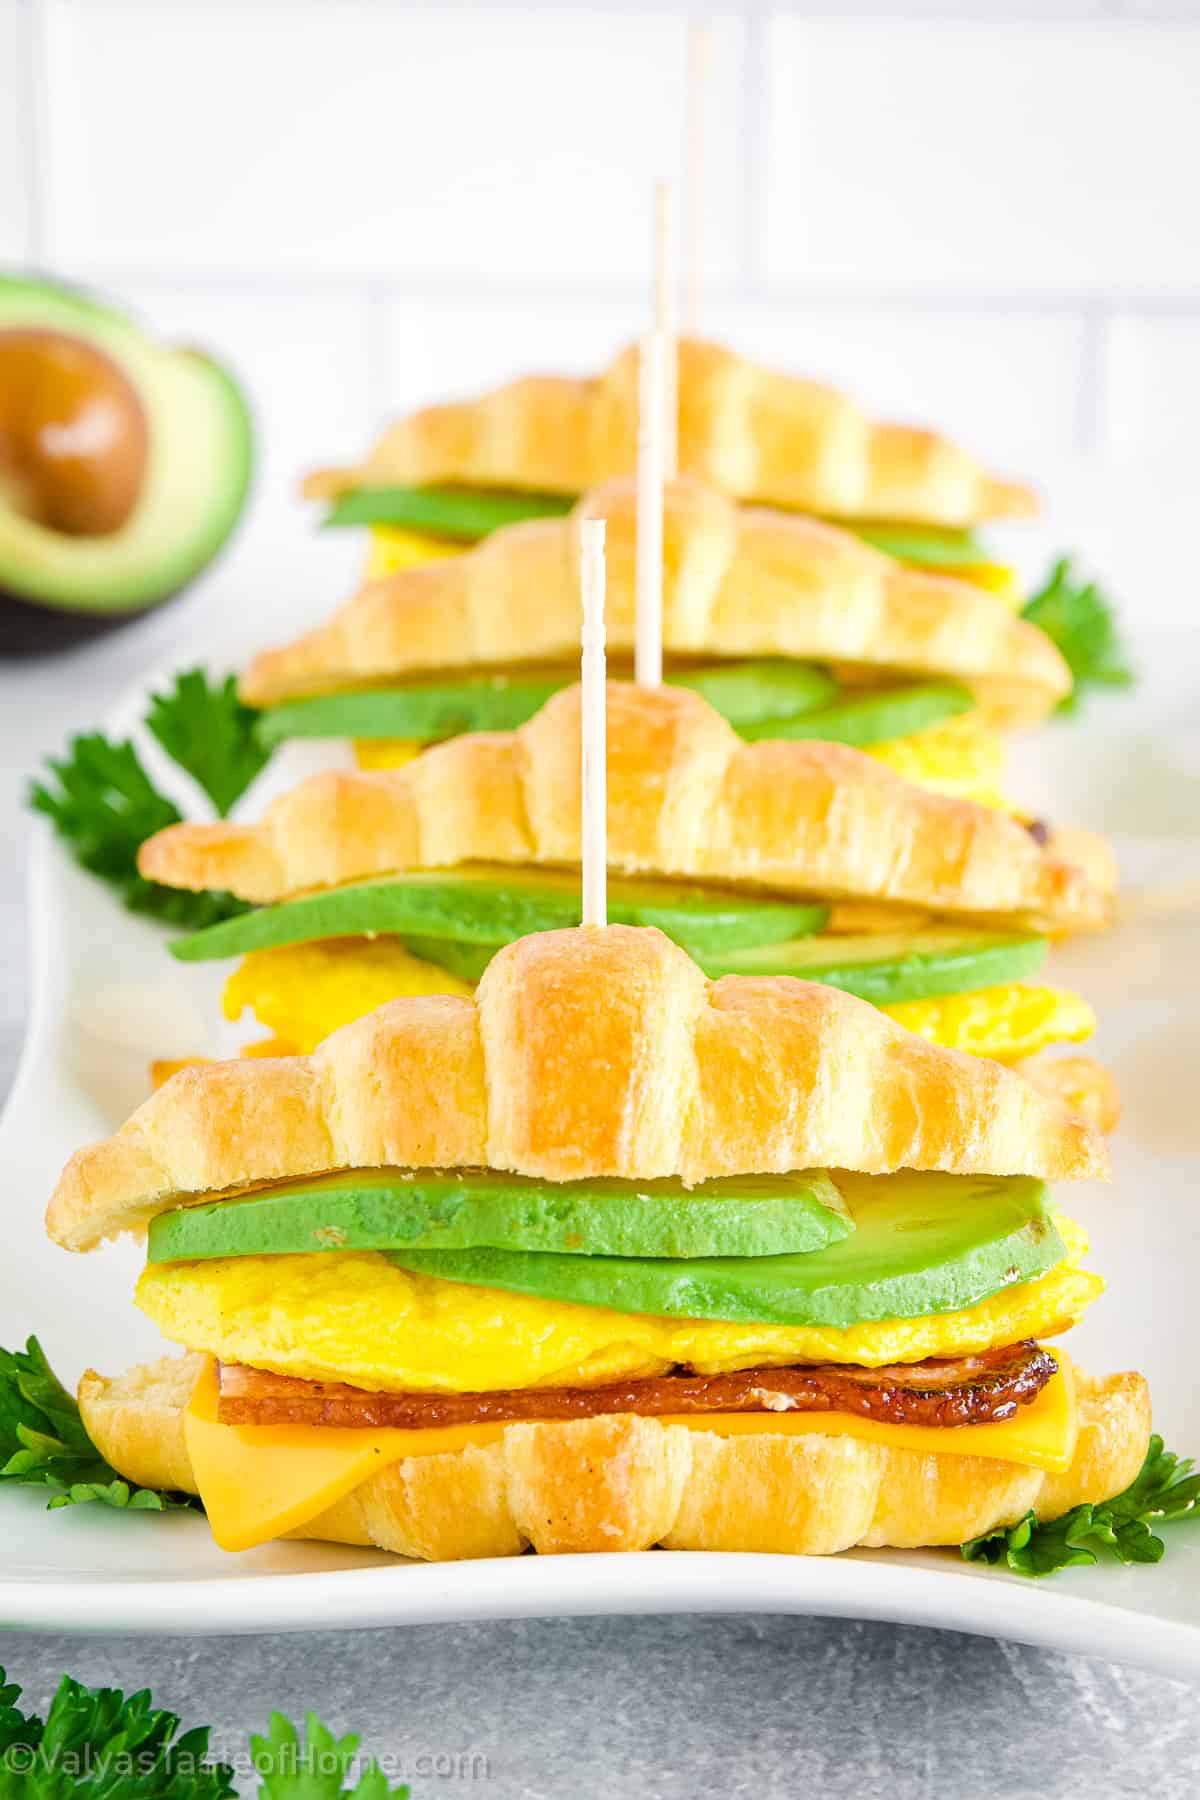 This Scrambled Egg Sandwich is the perfect breakfast recipe that you can prep ahead of time in only 10 minutes!